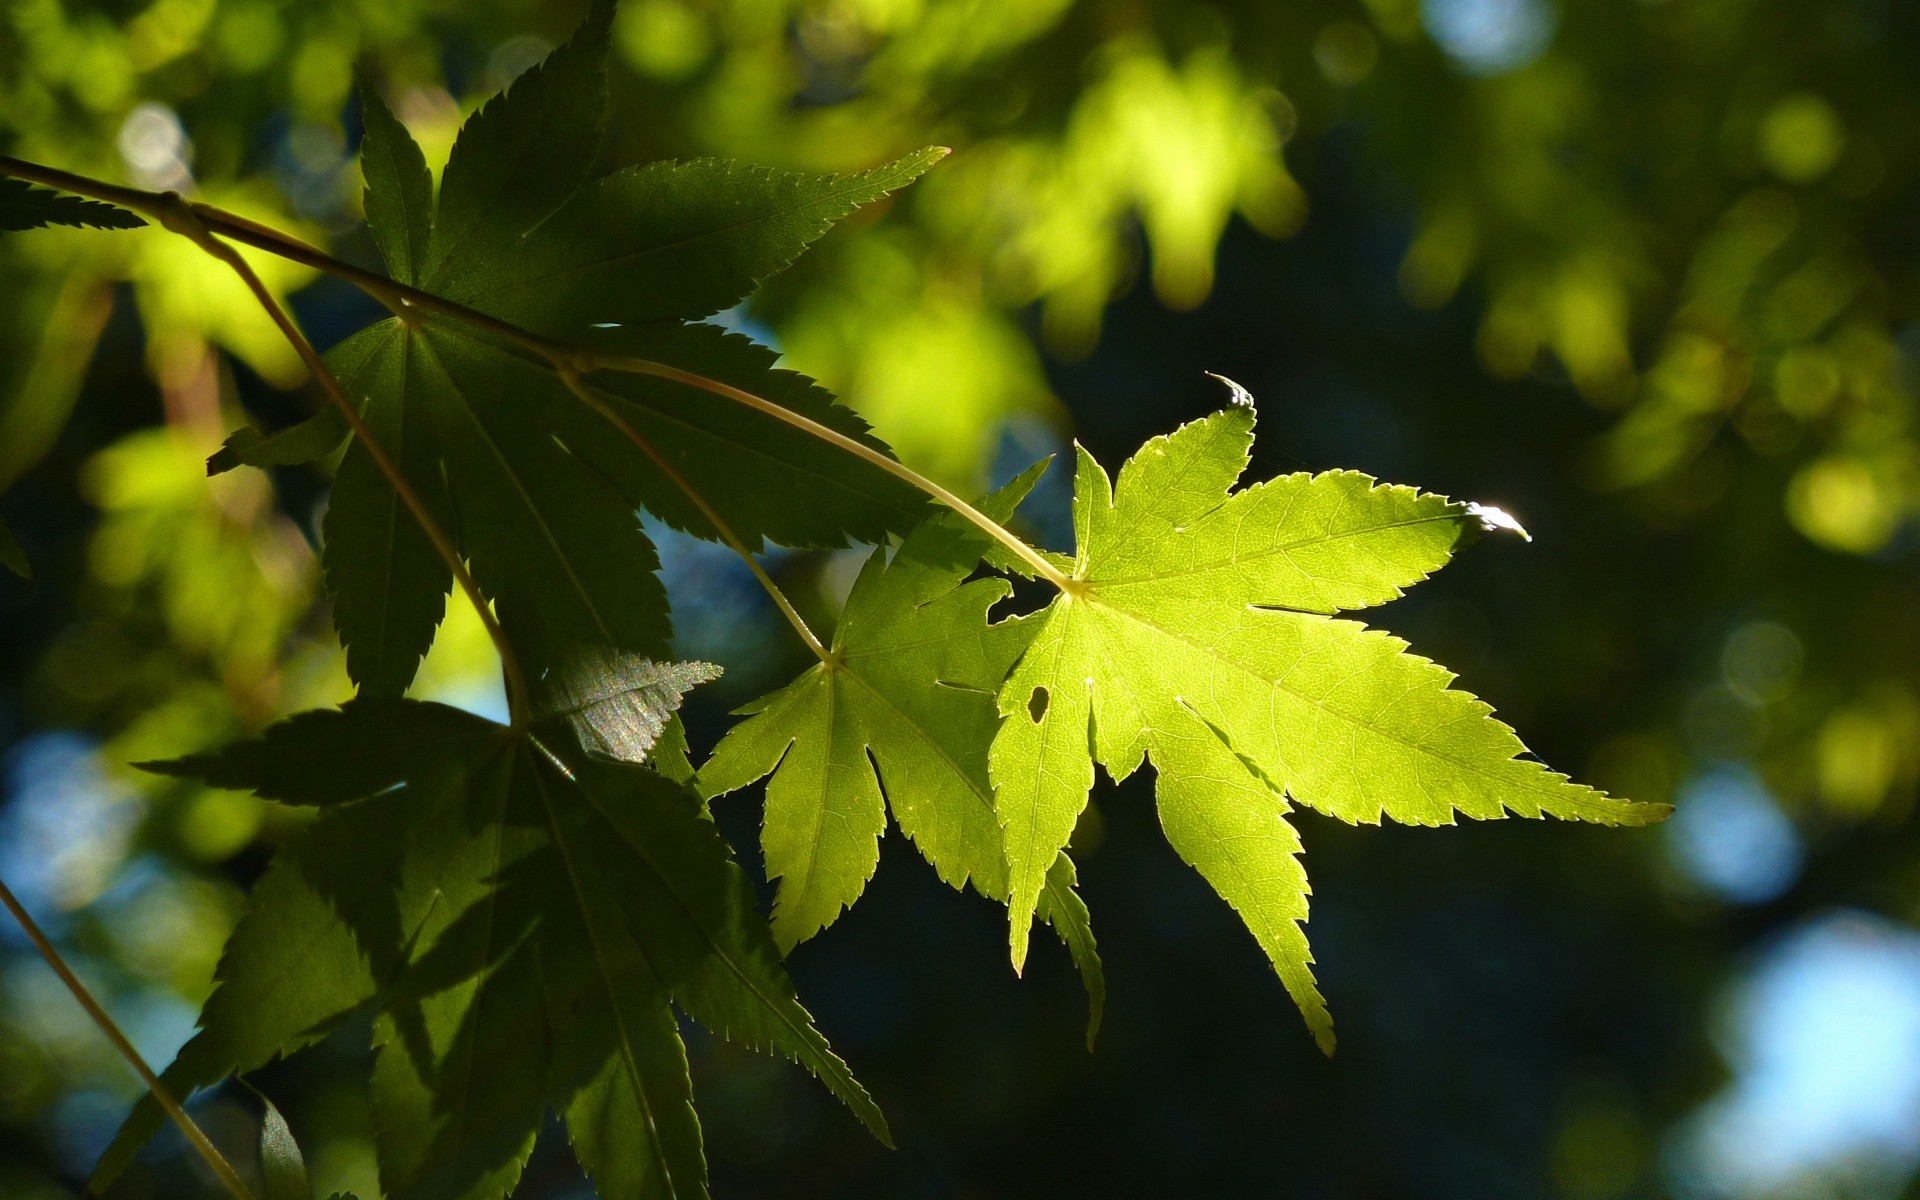 bokeh leaf nature flora lush fall growth bright tree outdoors sun fair weather wood summer environment maple branch garden color close-up